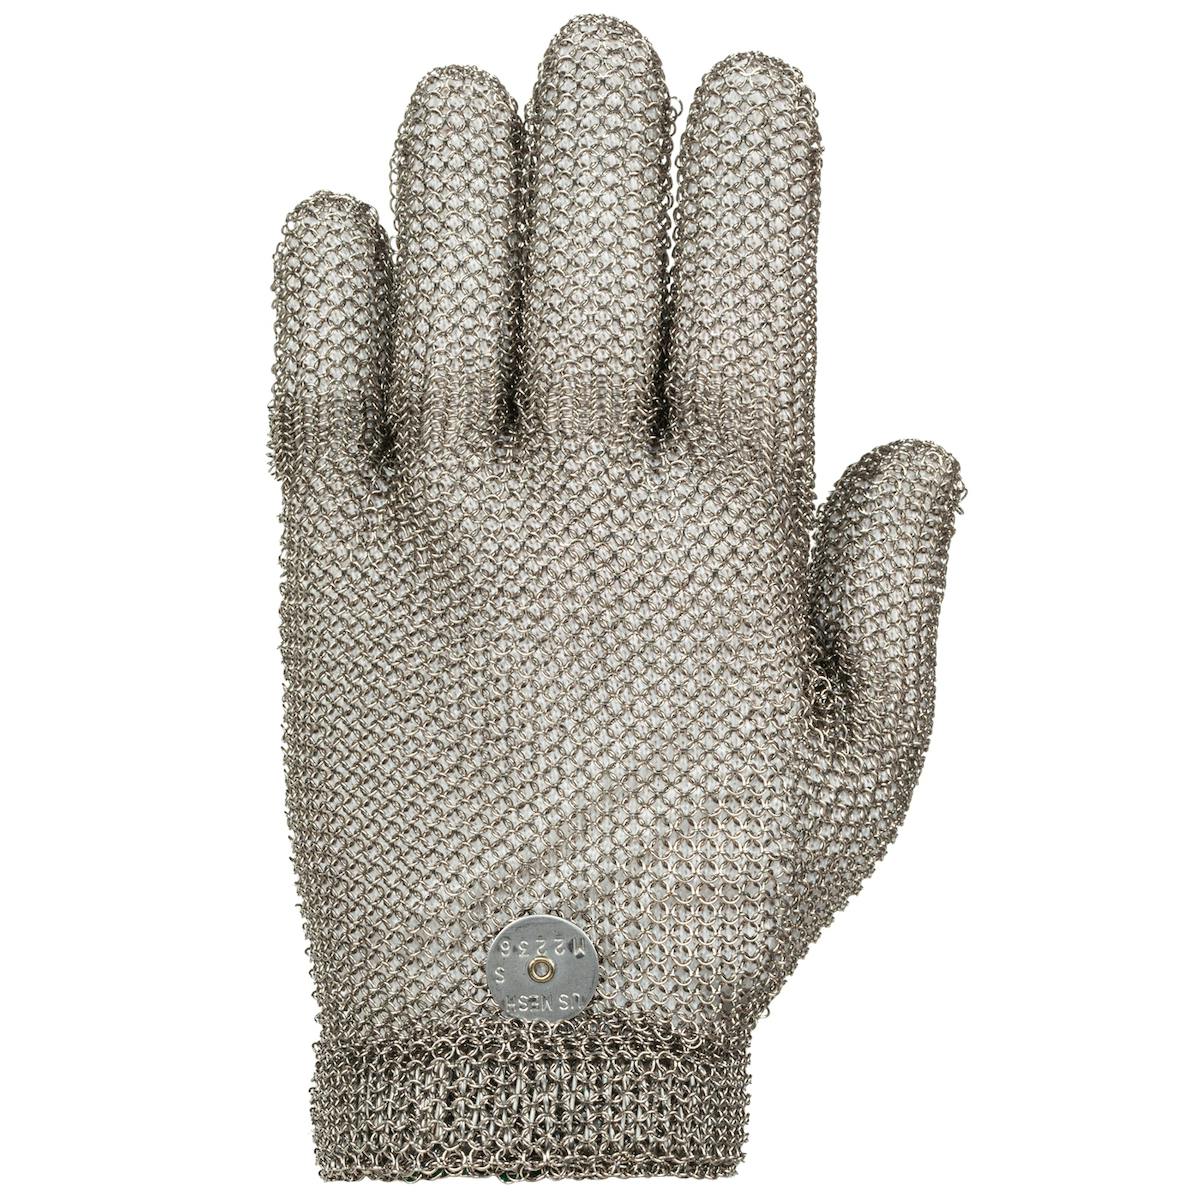 US Mesh® Stainless Steel Mesh Glove with Spring Closure - Wrist Length (USM-1147)